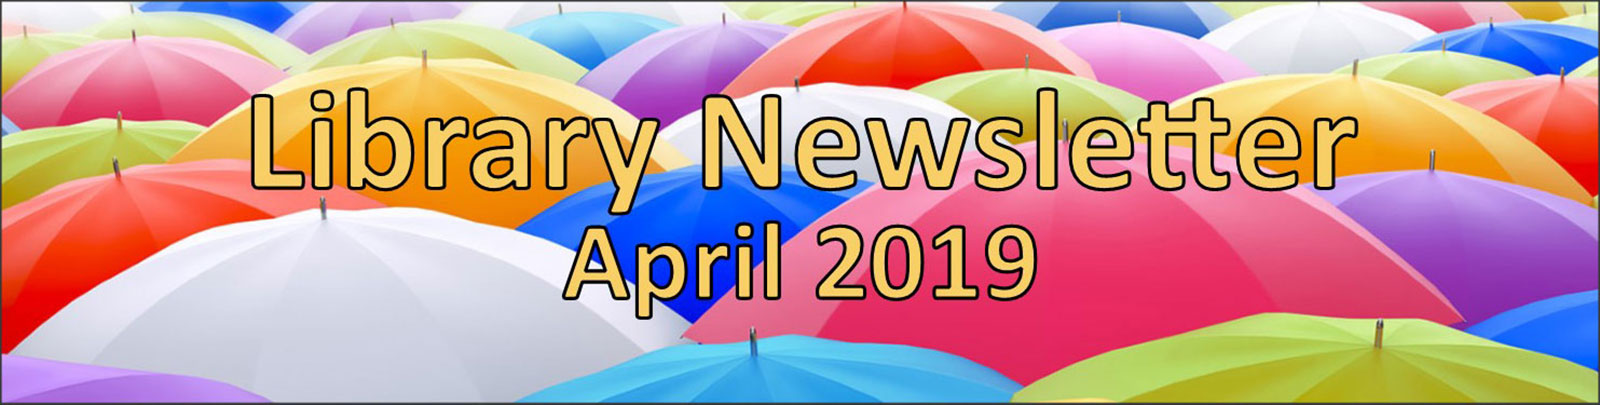 Library Newsletter March 2019